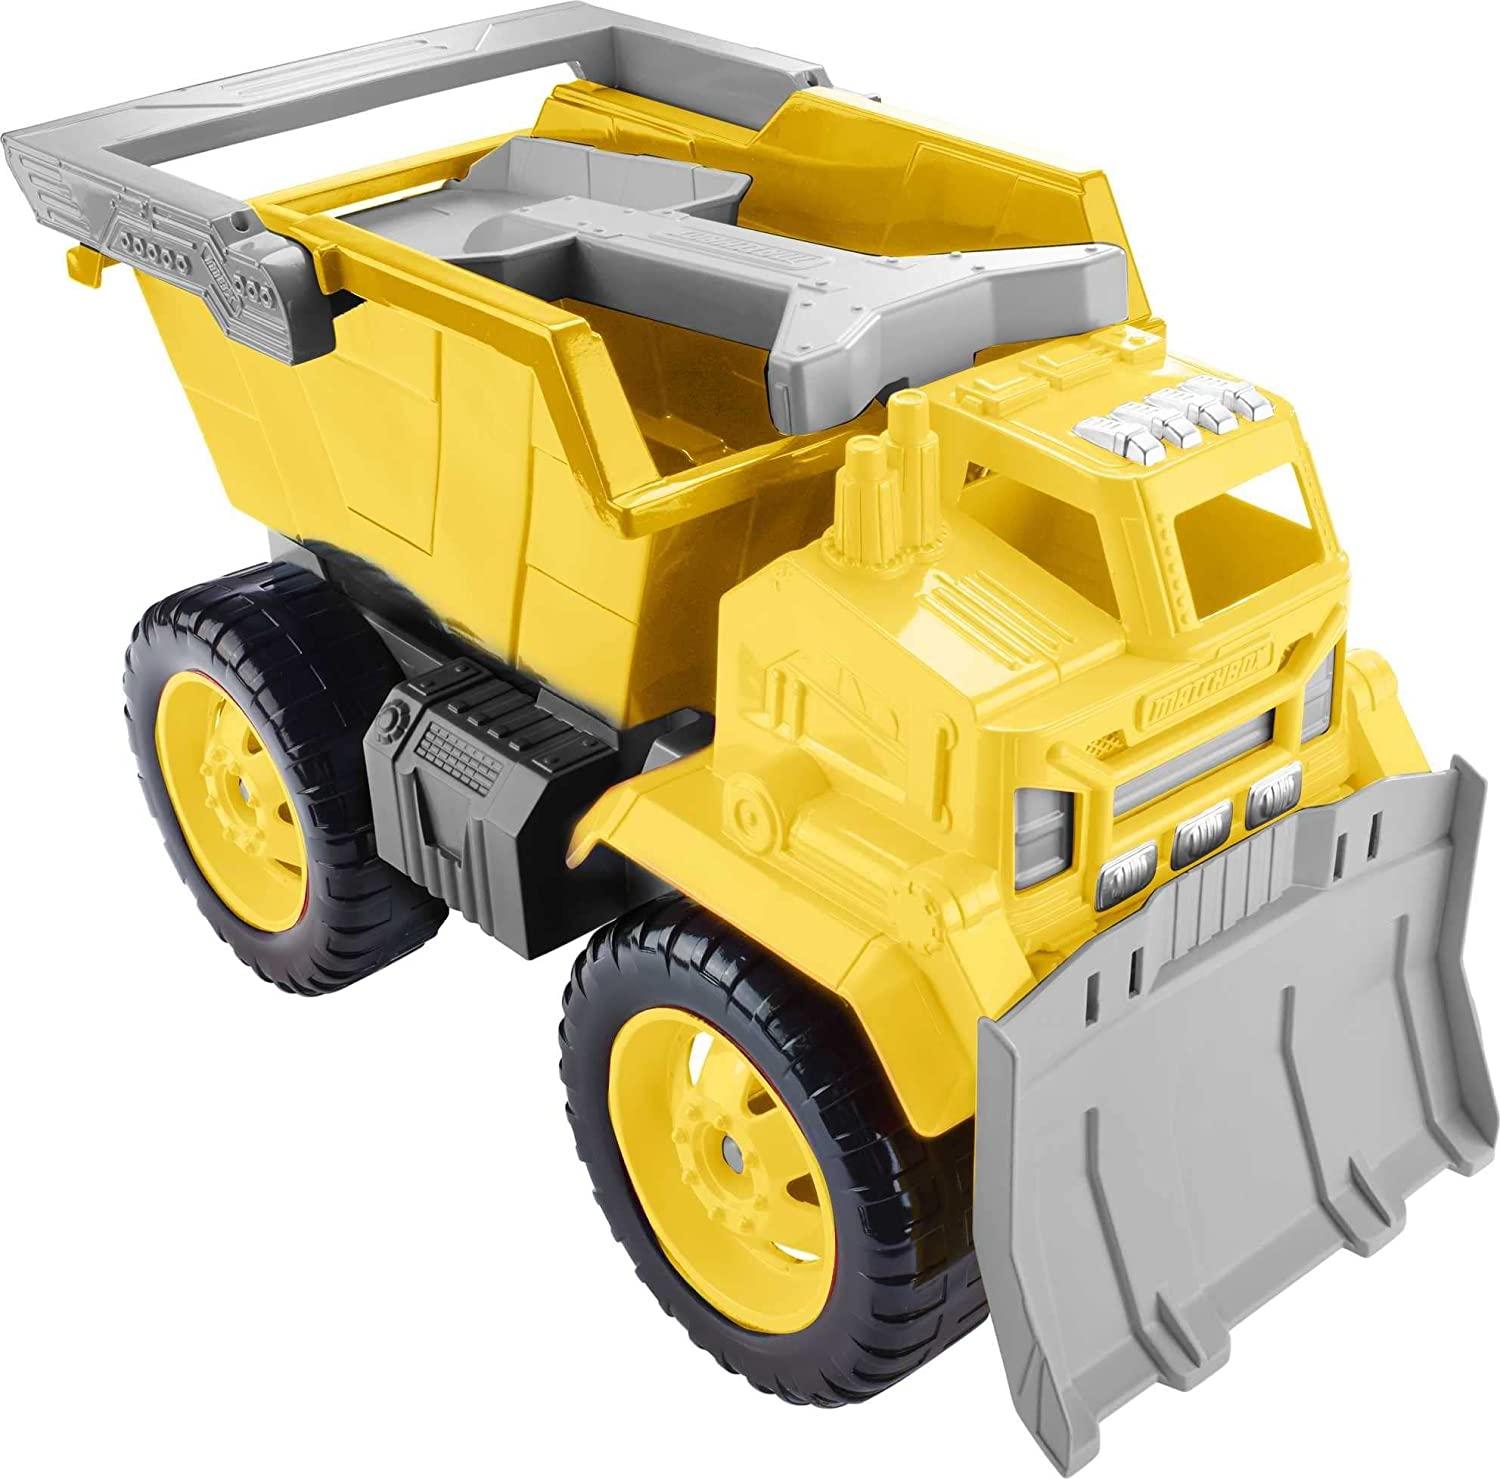 Matchbox Large-Scale Construction Sand Truck for $11.31